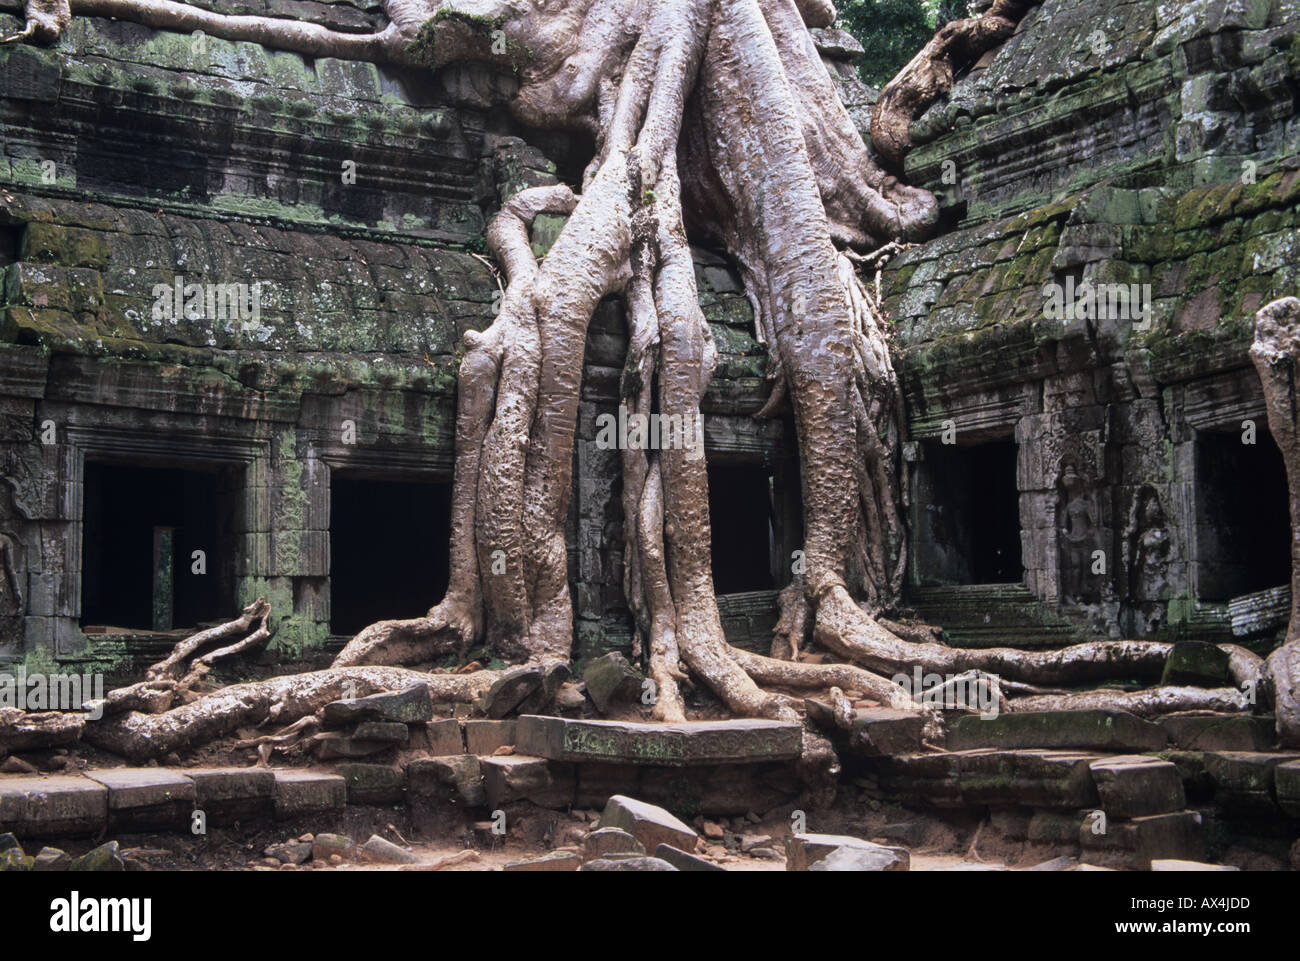 Ta Prohm is a temple at Angkor in the Siem Reap region of Cambodia famous for the trees growing out of the ruins Stock Photo